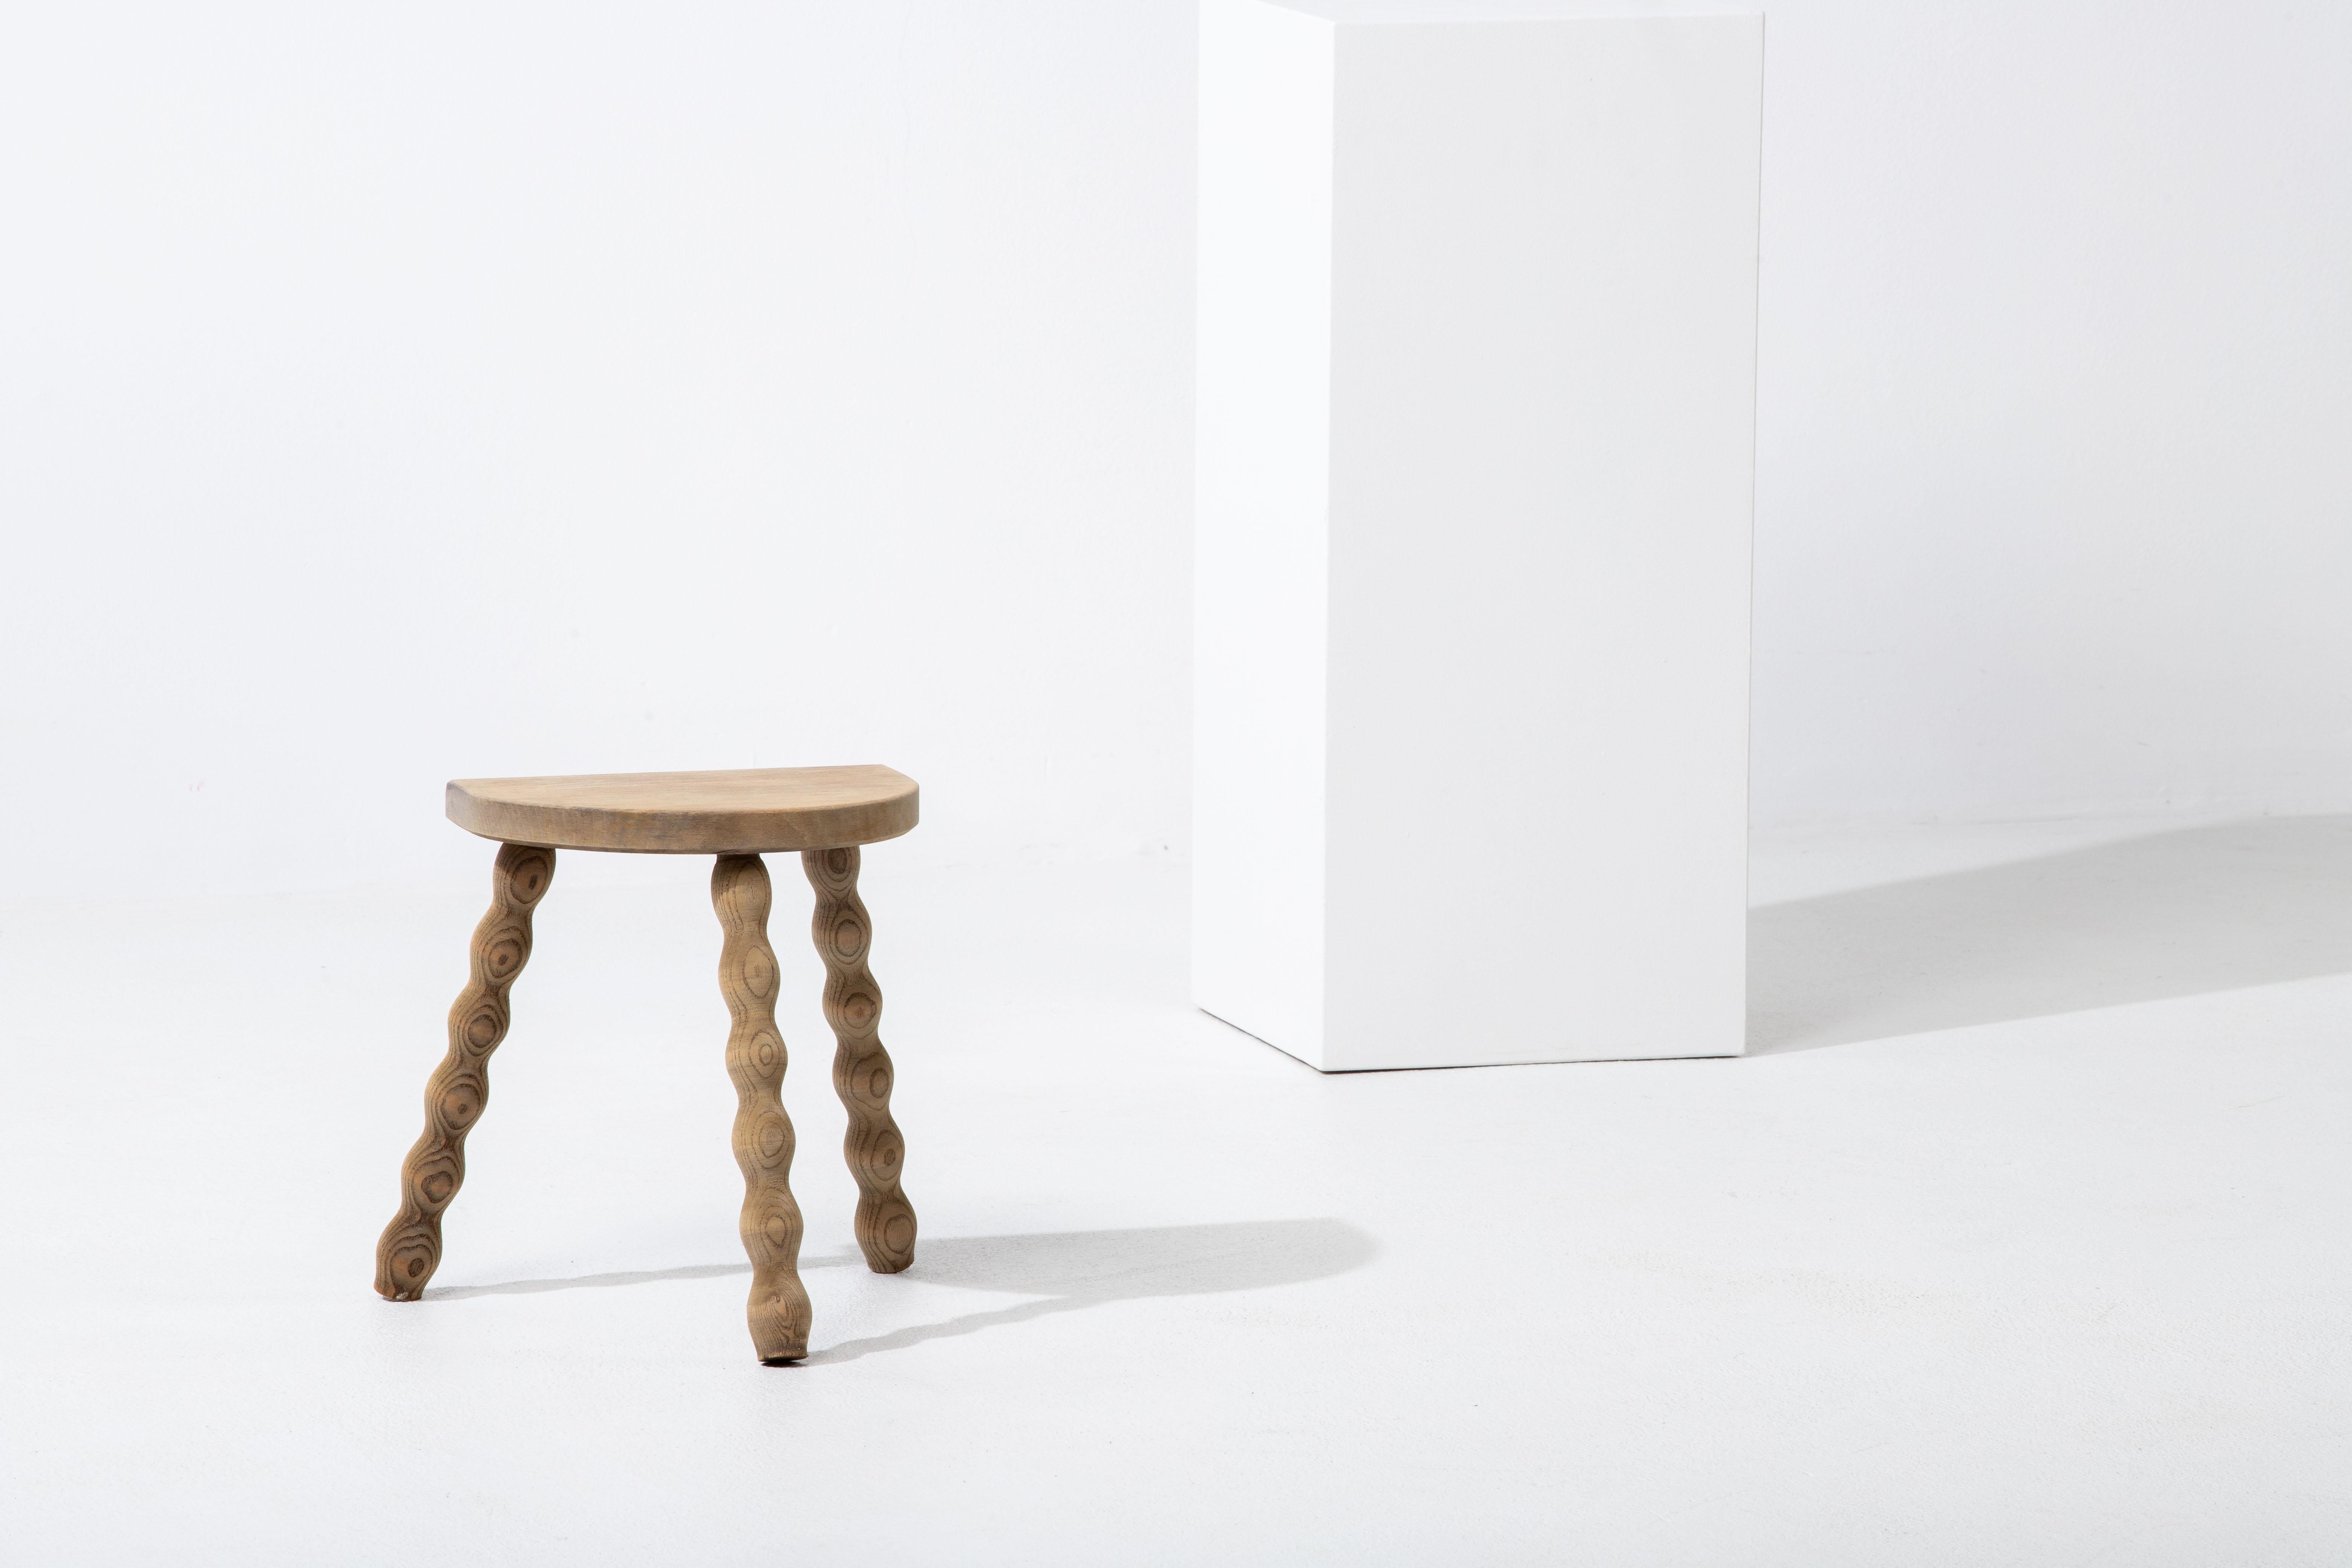 Exquisite Vintage French Wooden Stool: A Rustic Gem from the 1960s

Transport yourself to the rustic allure of 1960s France with this captivating wooden stool. Crafted in a truly rustic style, this piece exudes the charm of an era renowned for its